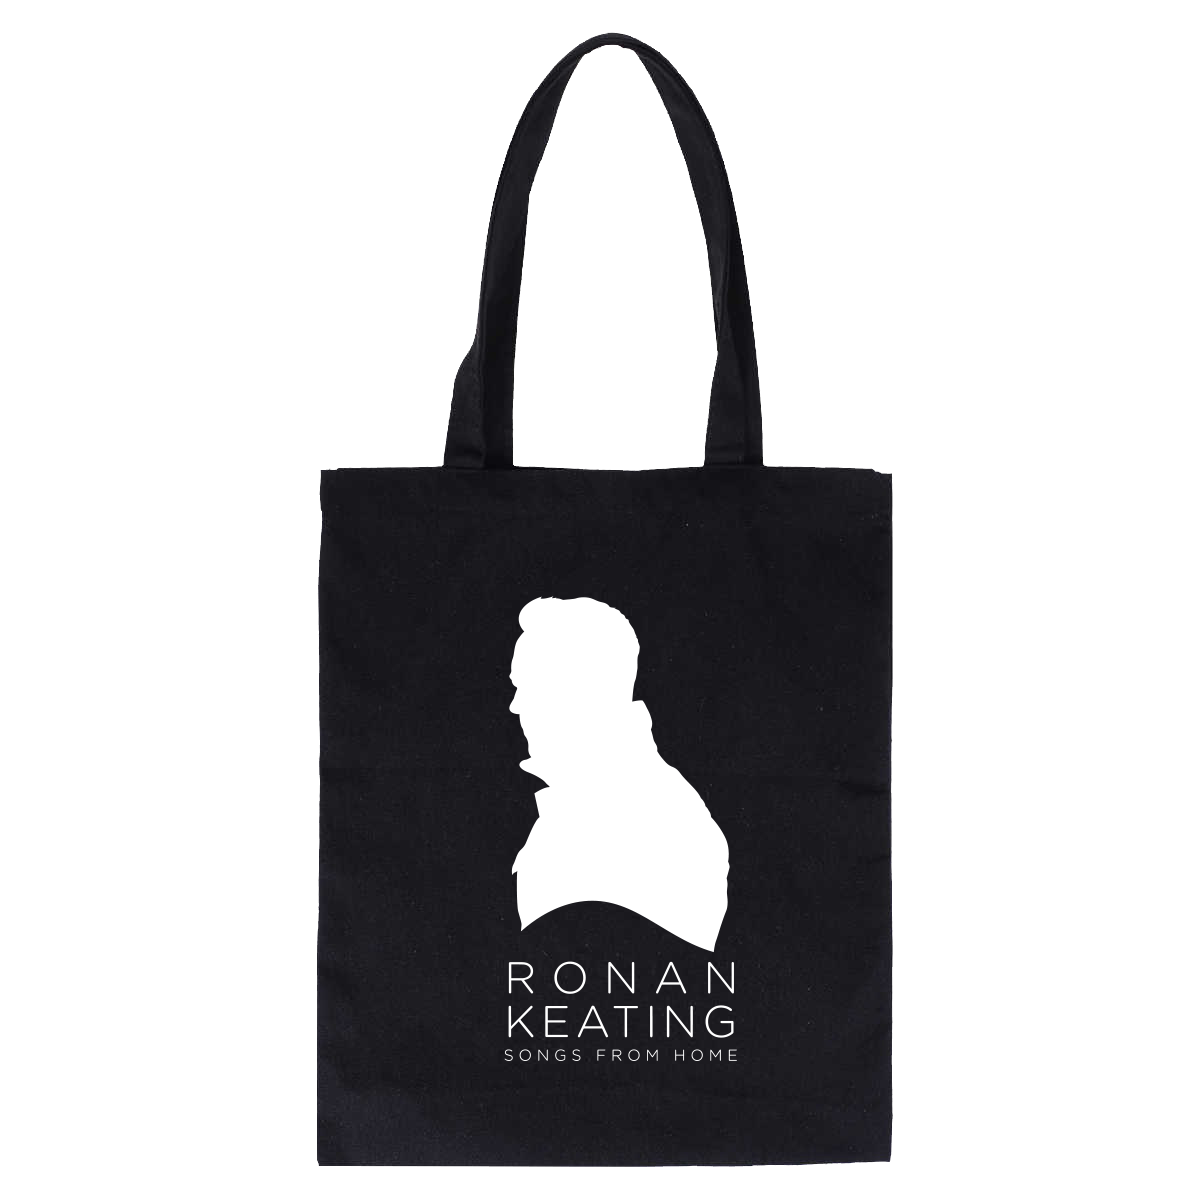 Ronan Keating - Songs From Home Silhouette Tote